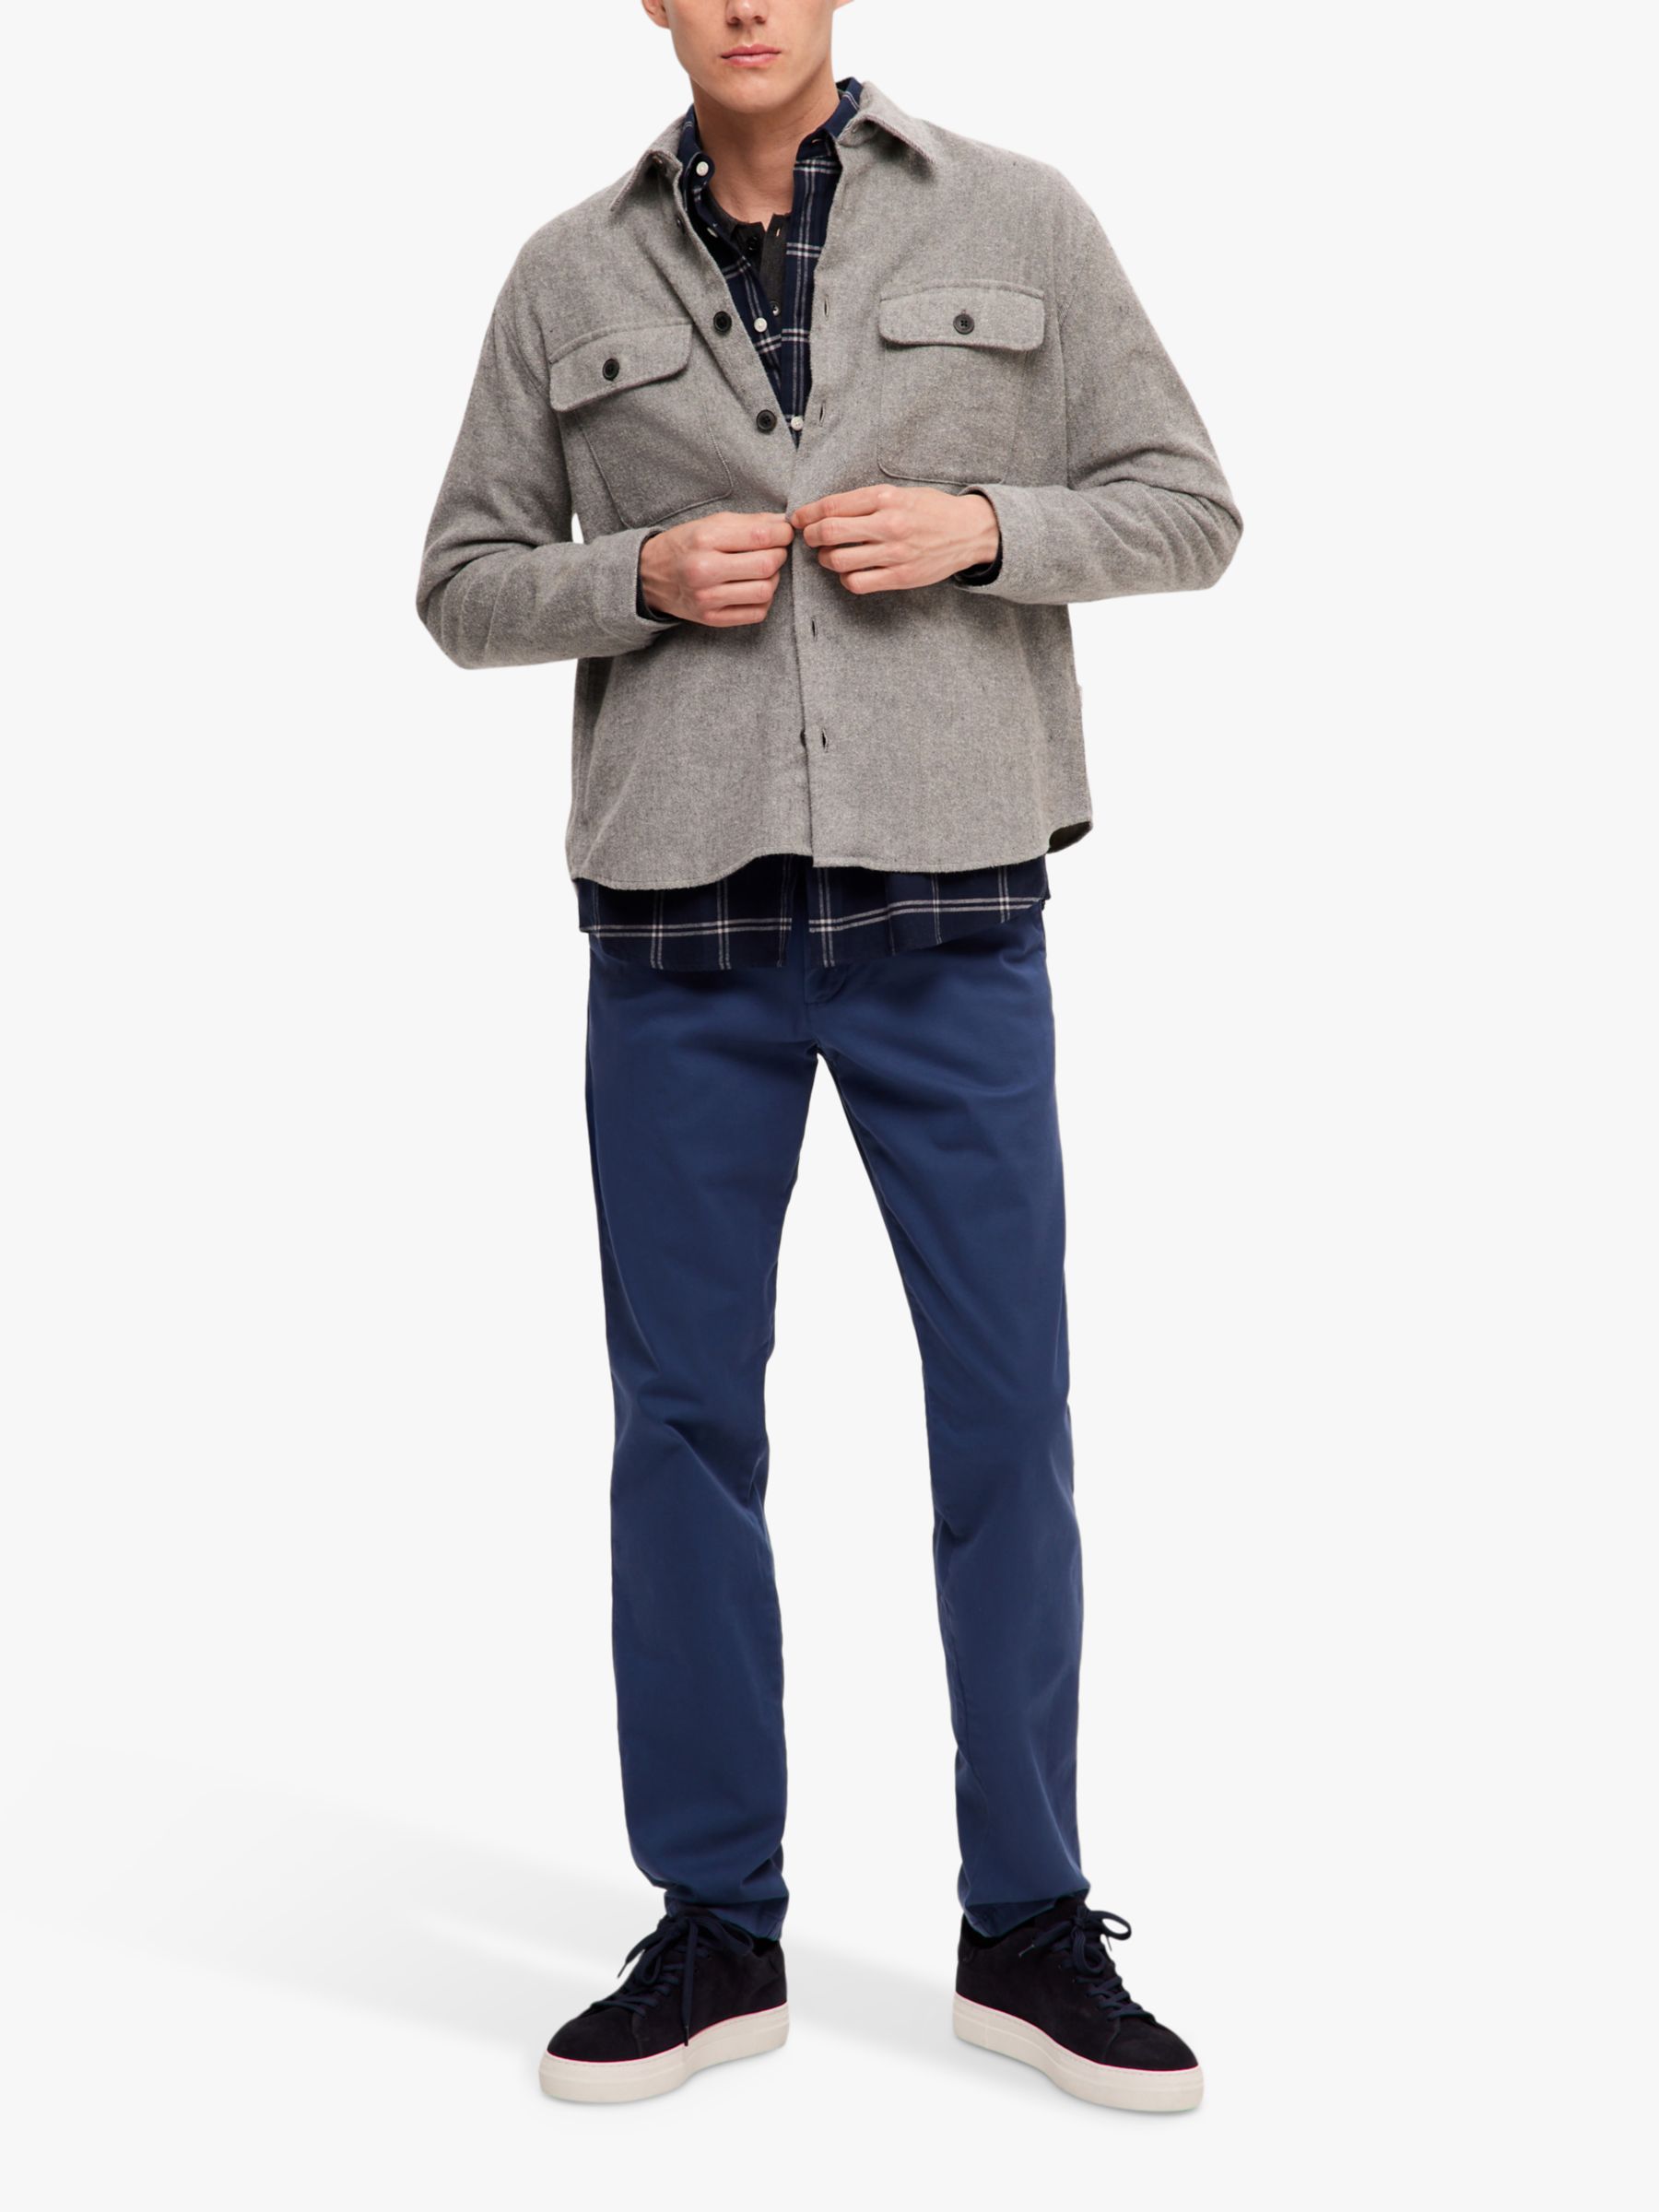 Buy SELECTED HOMME Mason Twill Overshirt, Grey Online at johnlewis.com